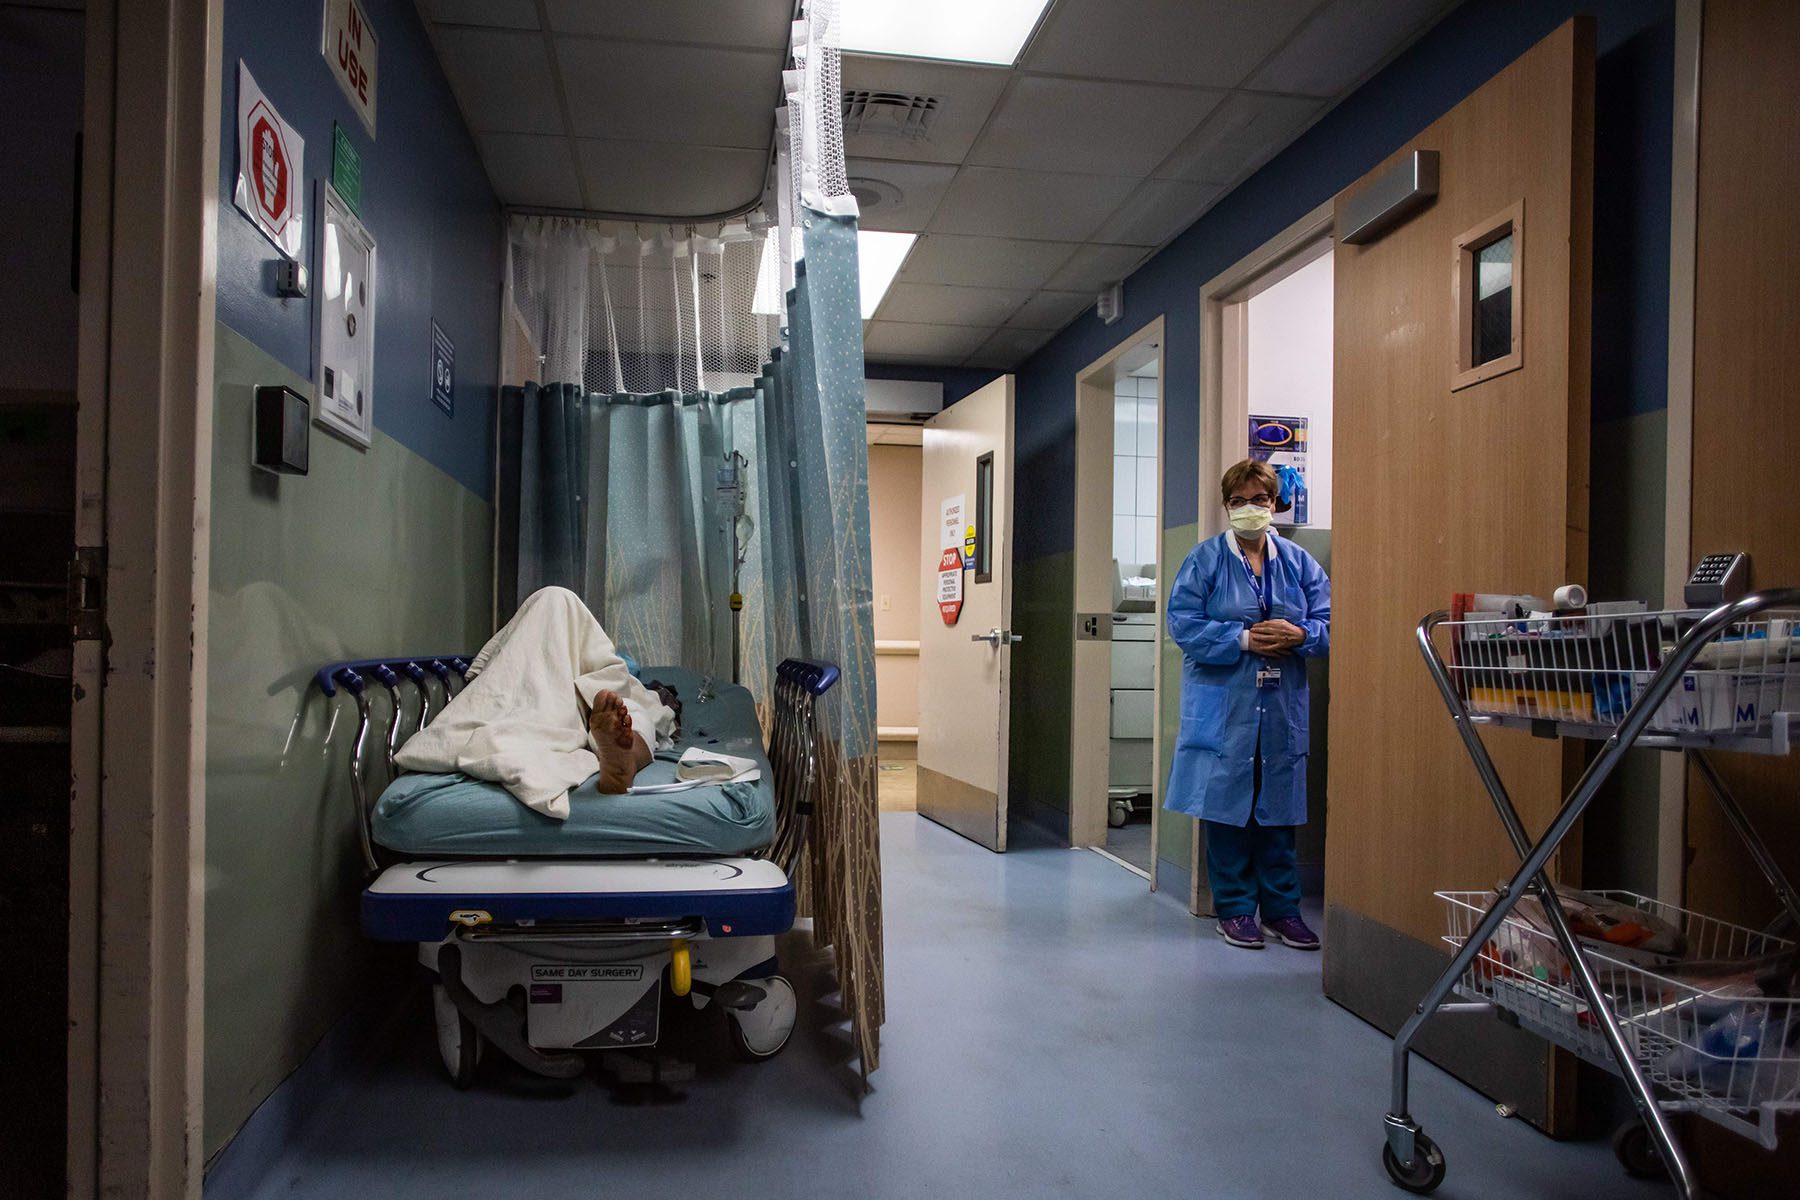 A nurse checks in on a patient as they wait for a room.